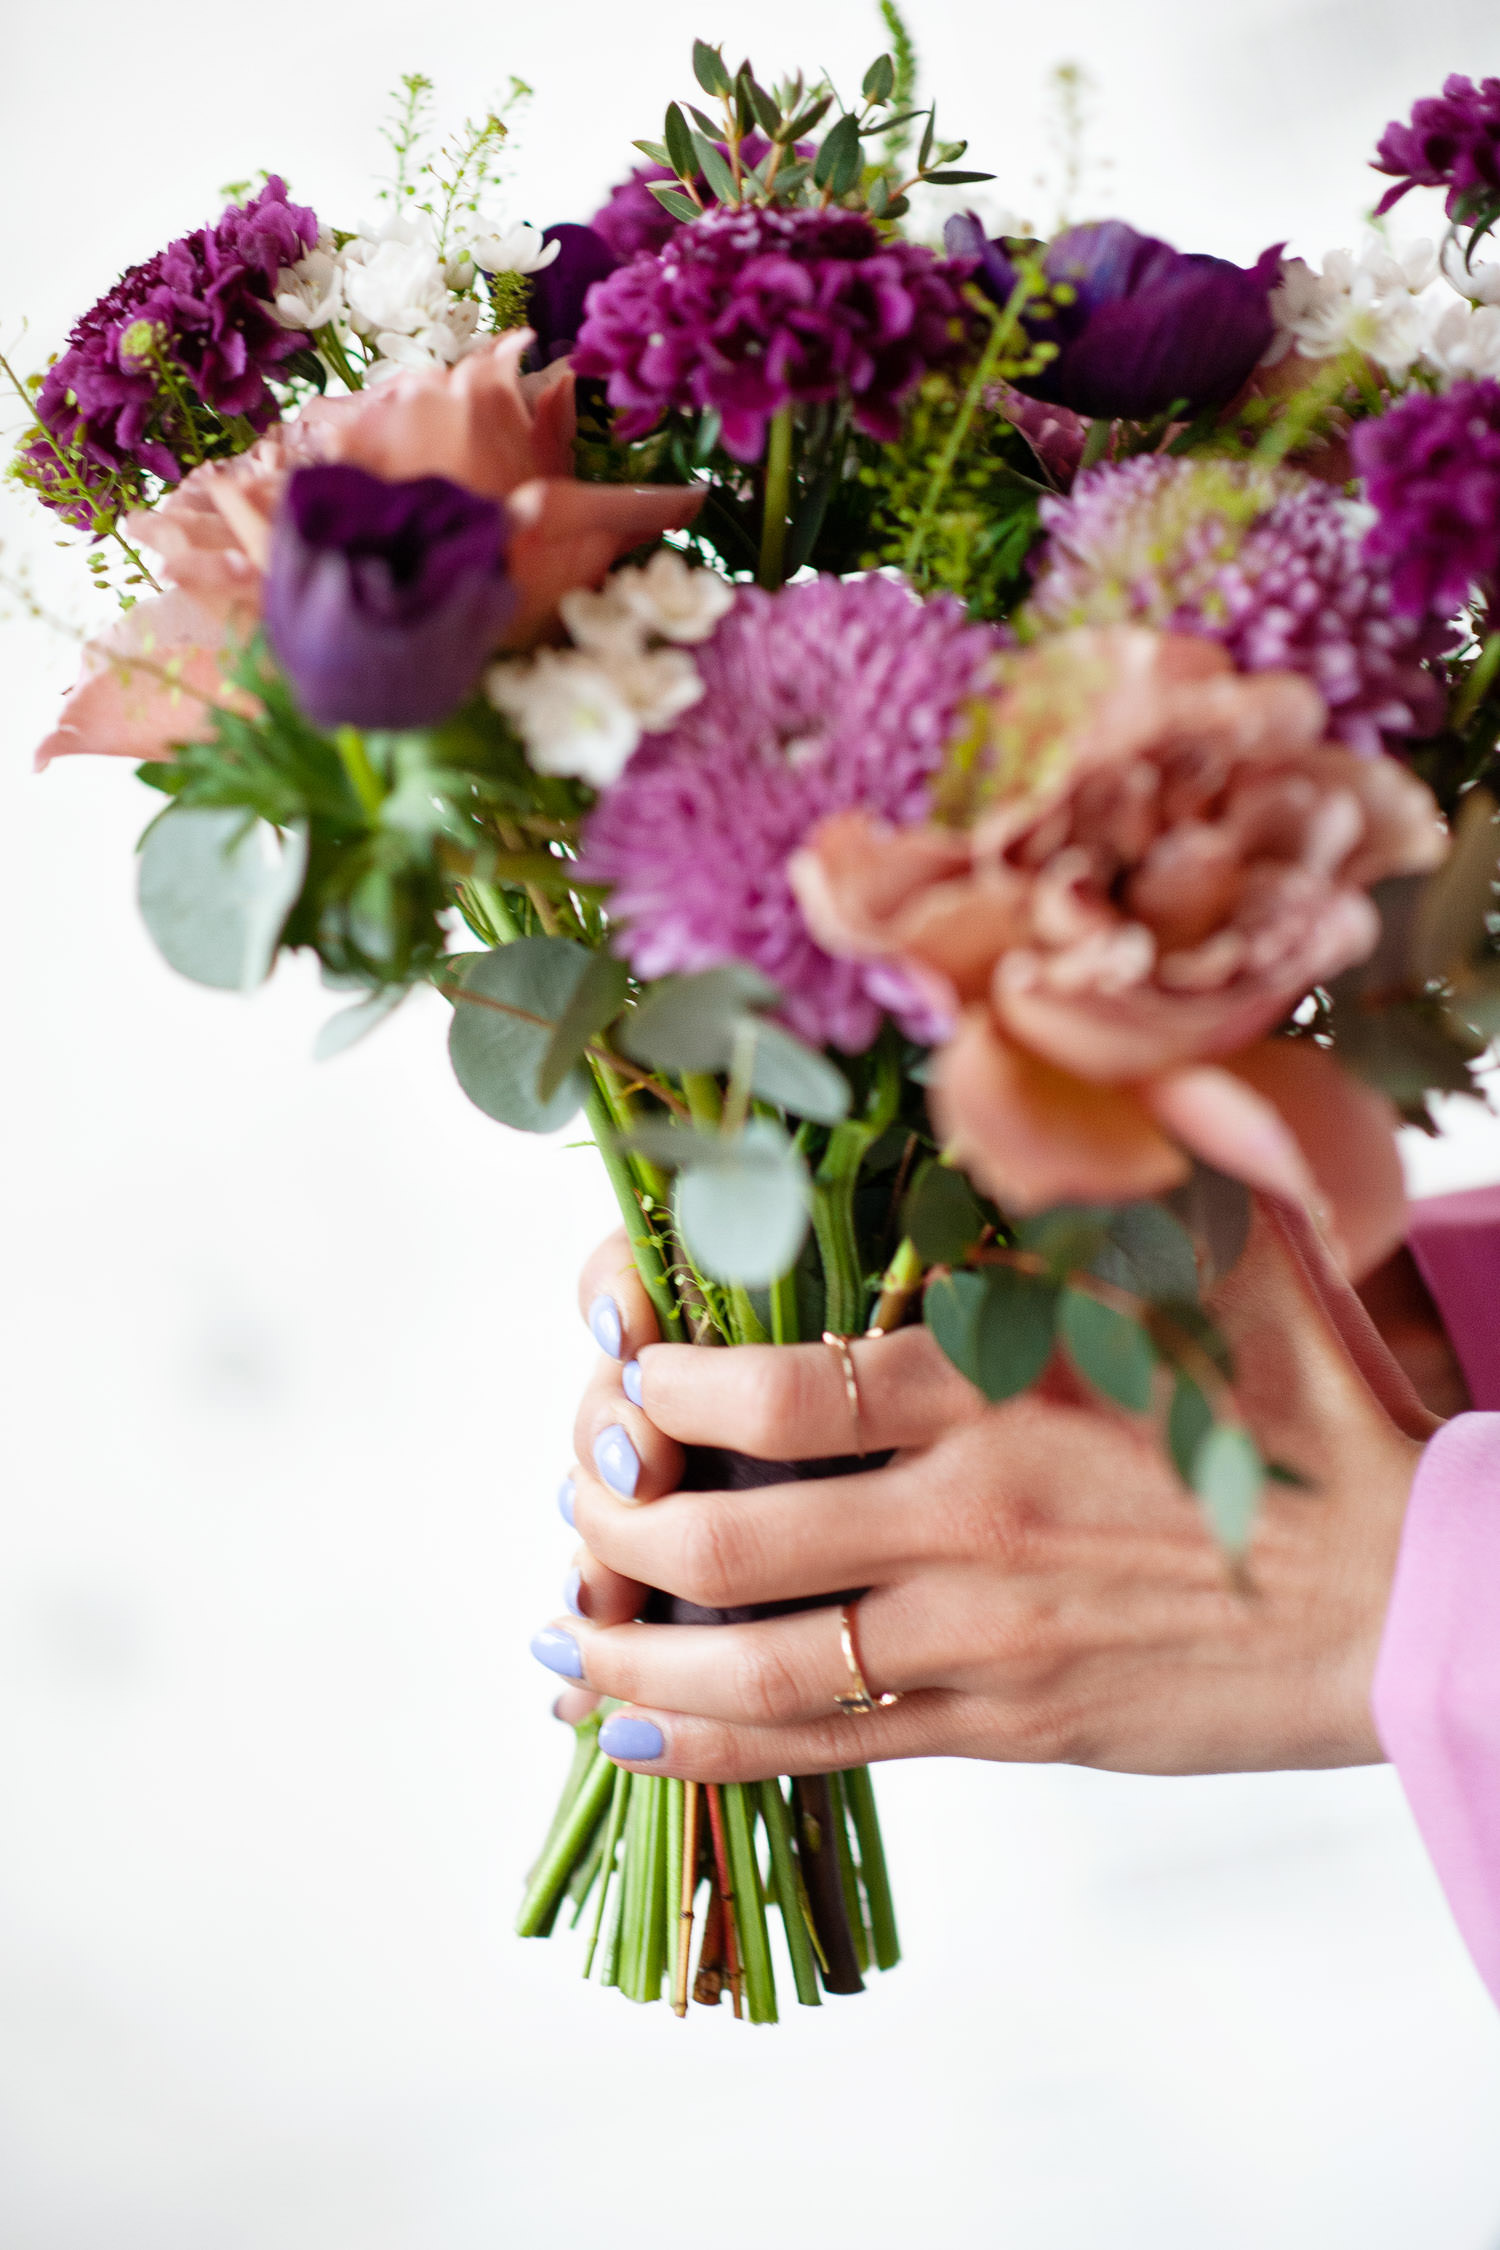 Bridesmaid with lilac-toned nails for a spring wedding captured by Tara Whittaker Photography